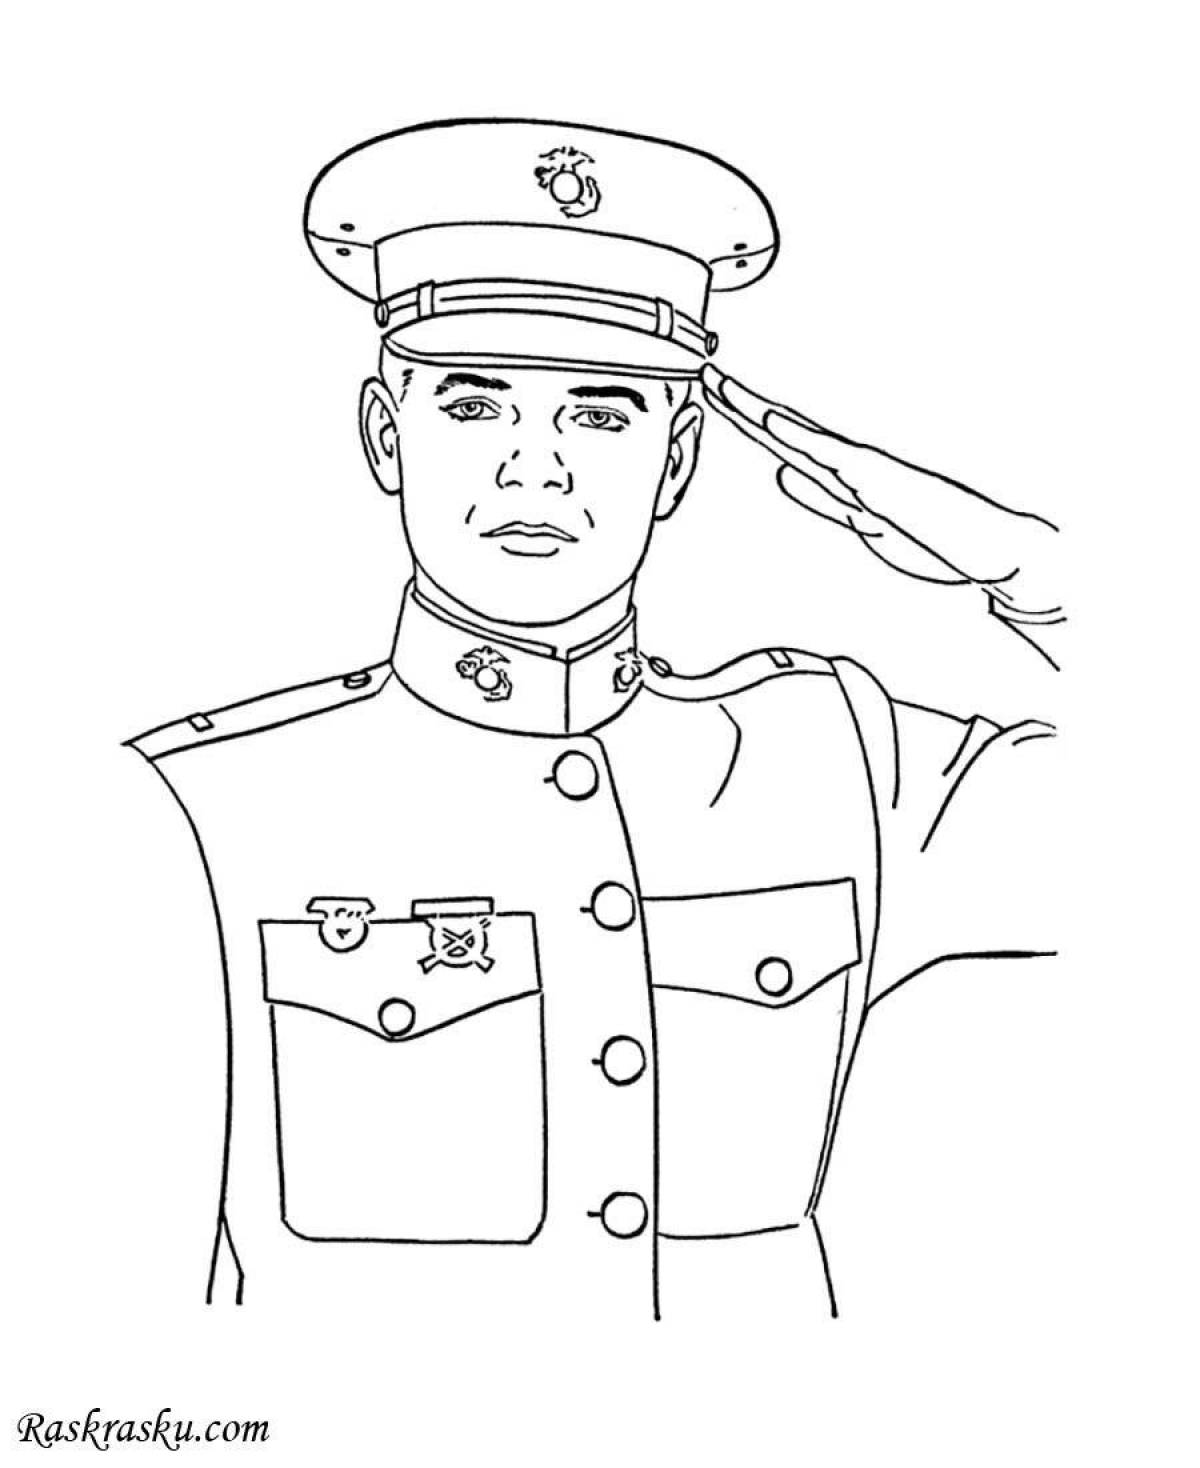 Gorgeous soldier coloring book for kids